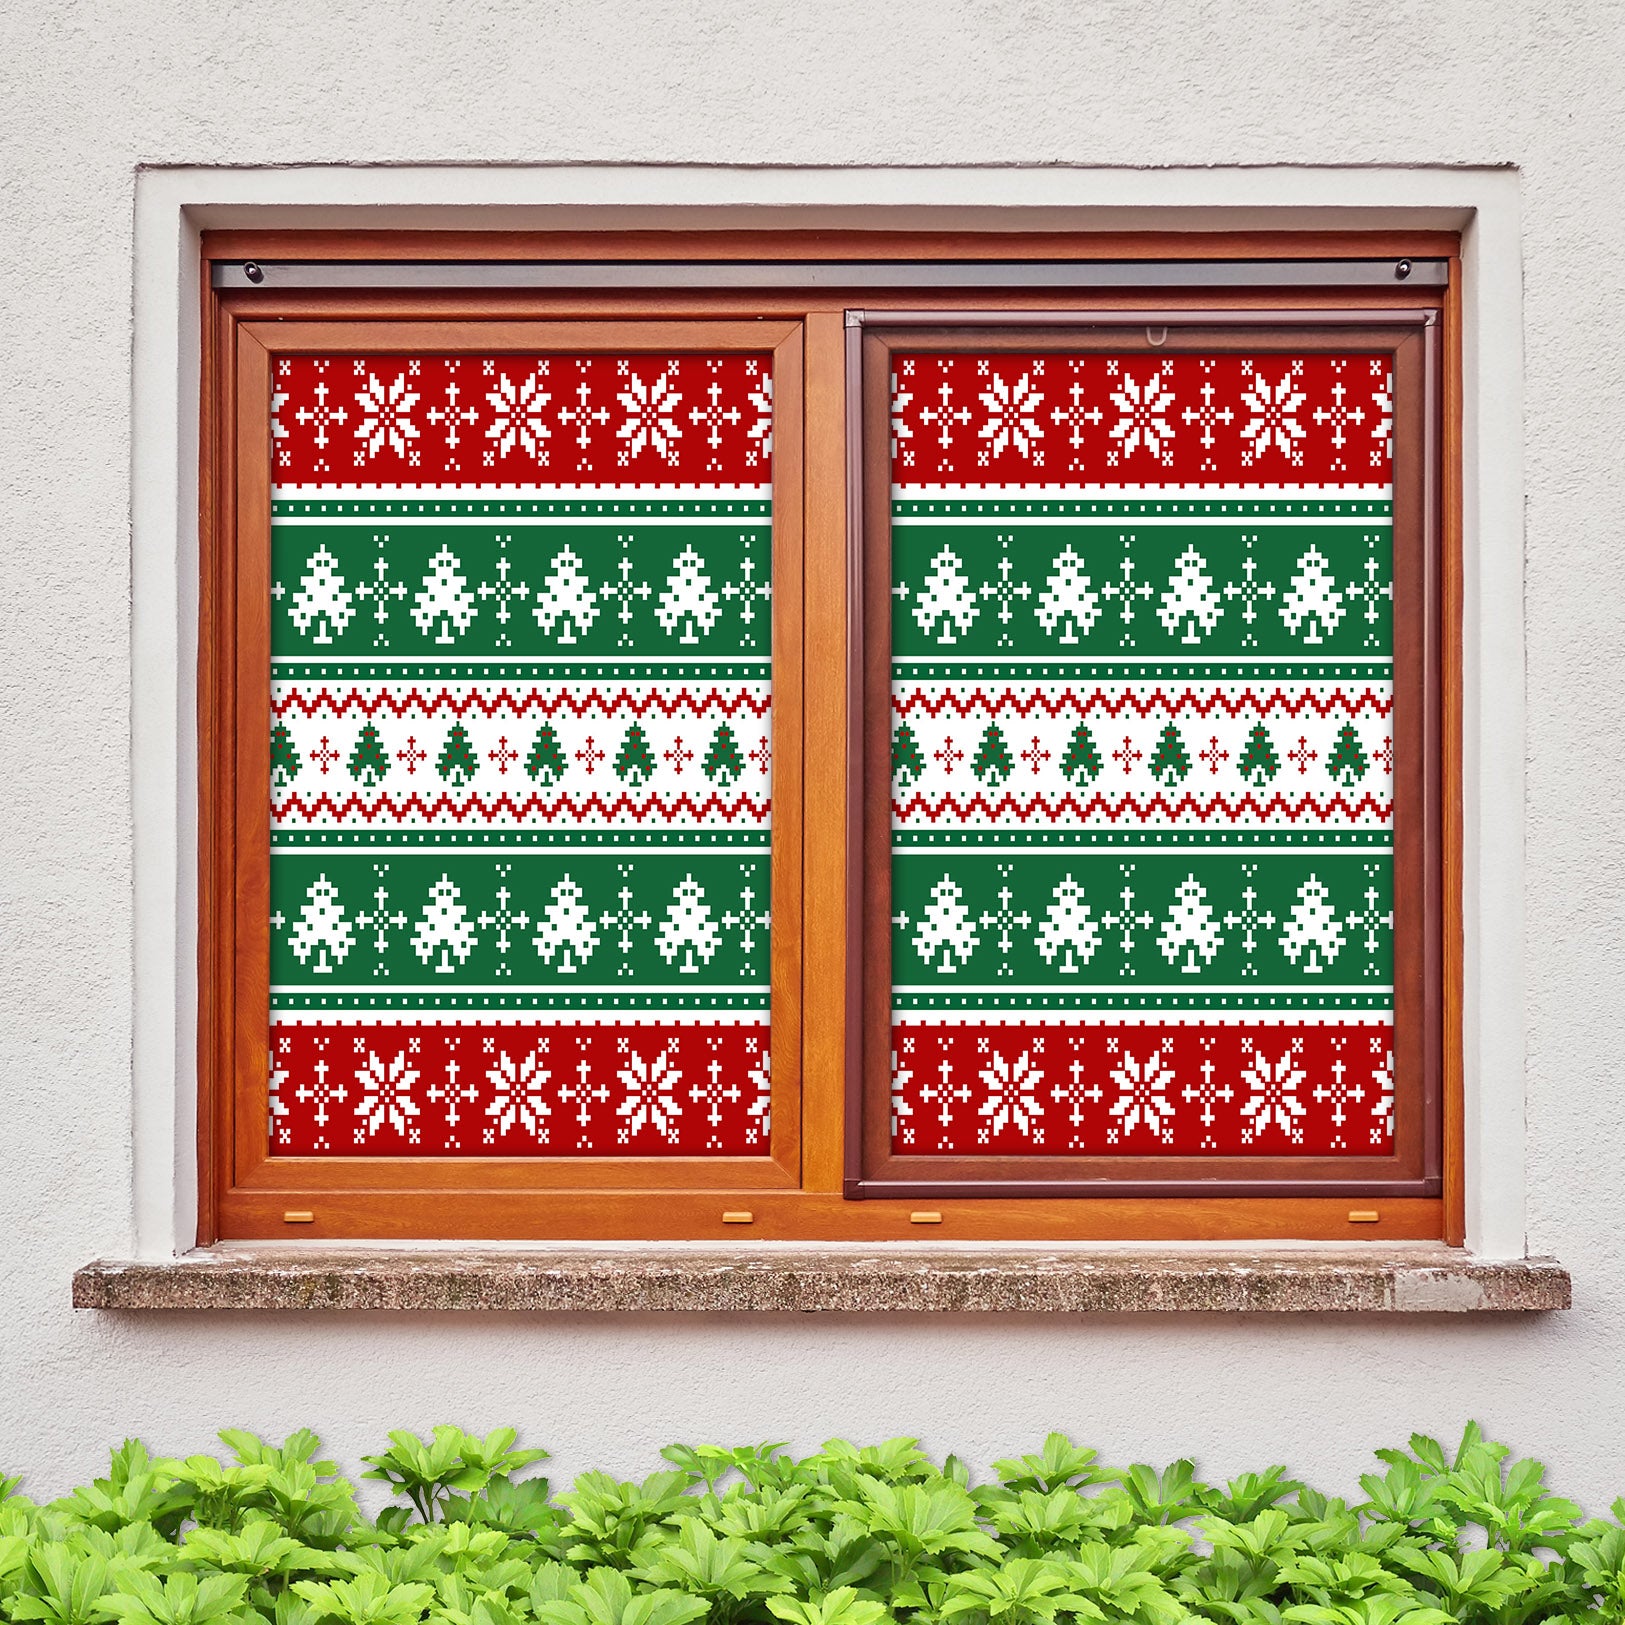 3D Christmas Tree Pattern 43160 Christmas Window Film Print Sticker Cling Stained Glass Xmas